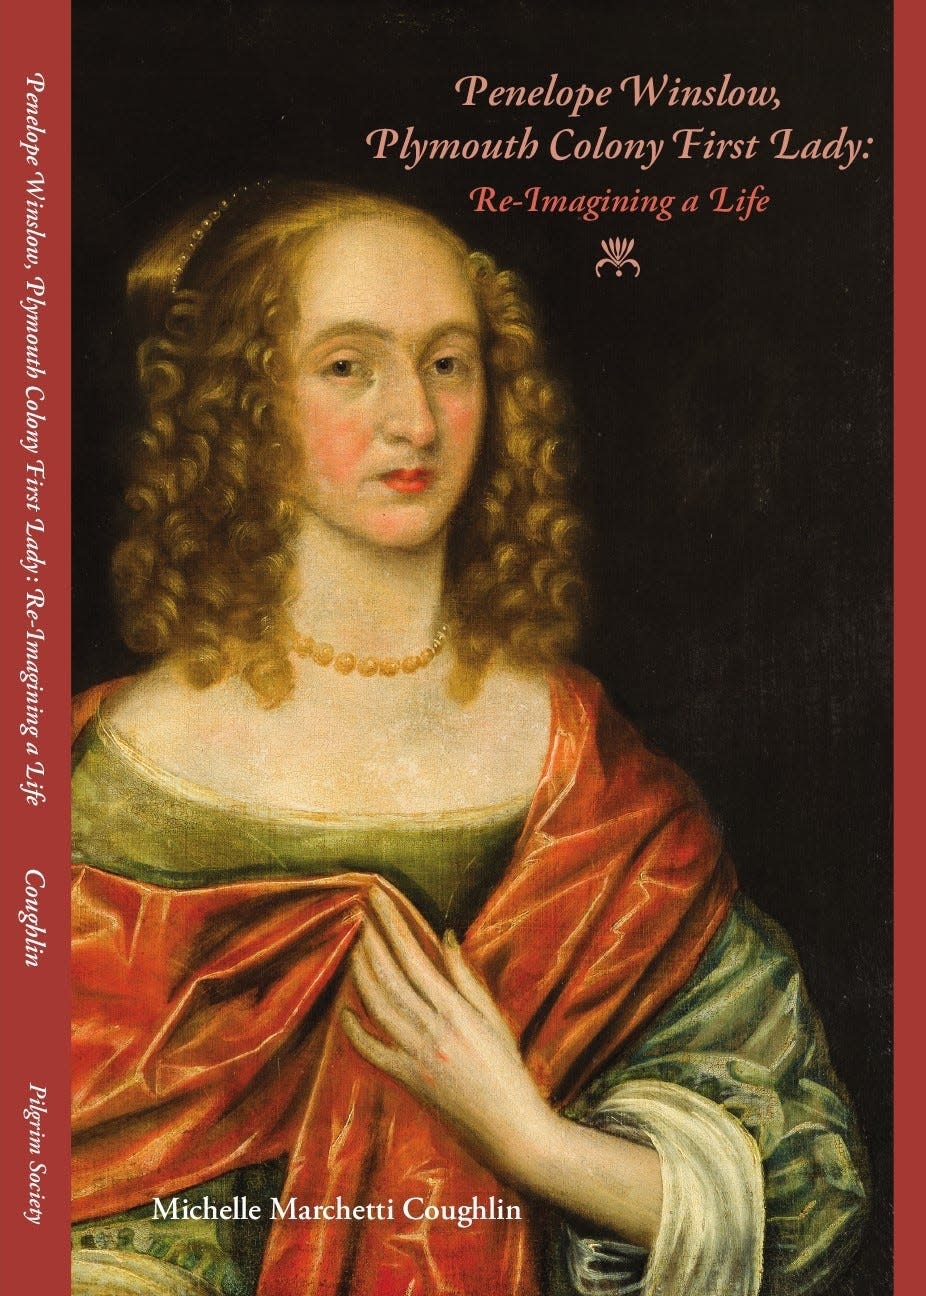 "Penelope Winslow, First Lady of Plymouth Colony: Re-Imagining a Life."